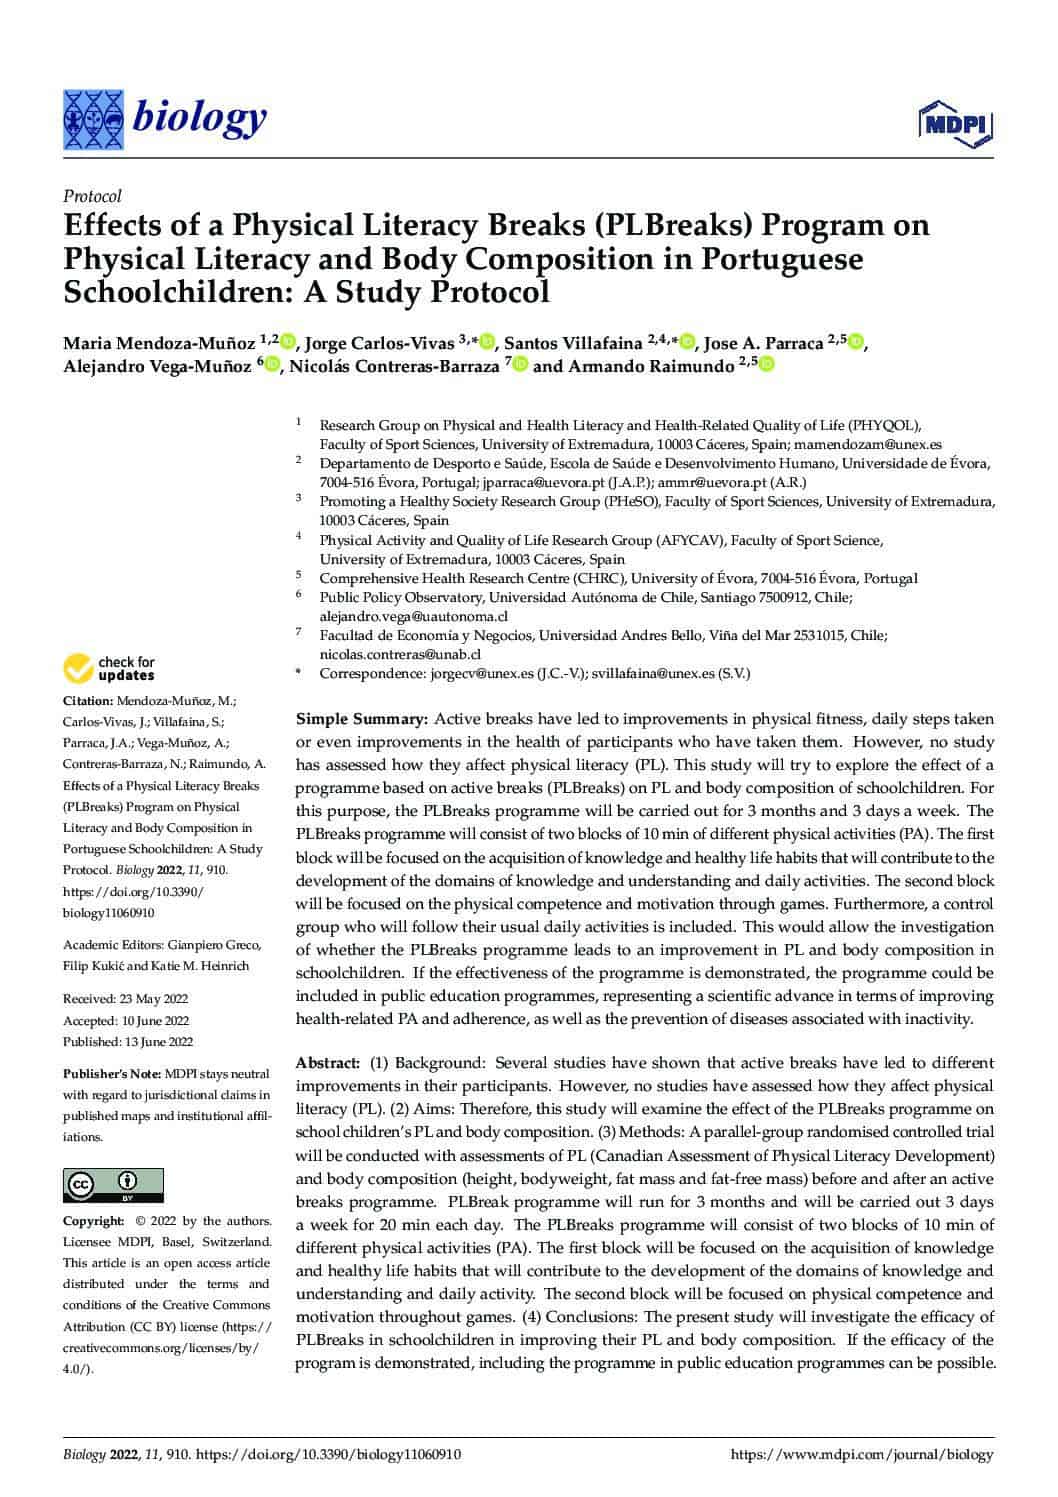 Featured image for “Effects of a Physical Literacy Breaks (PLBreaks) Program on Physical Literacy and Body Composition in Portuguese Schoolchildren: A Study Protocol”